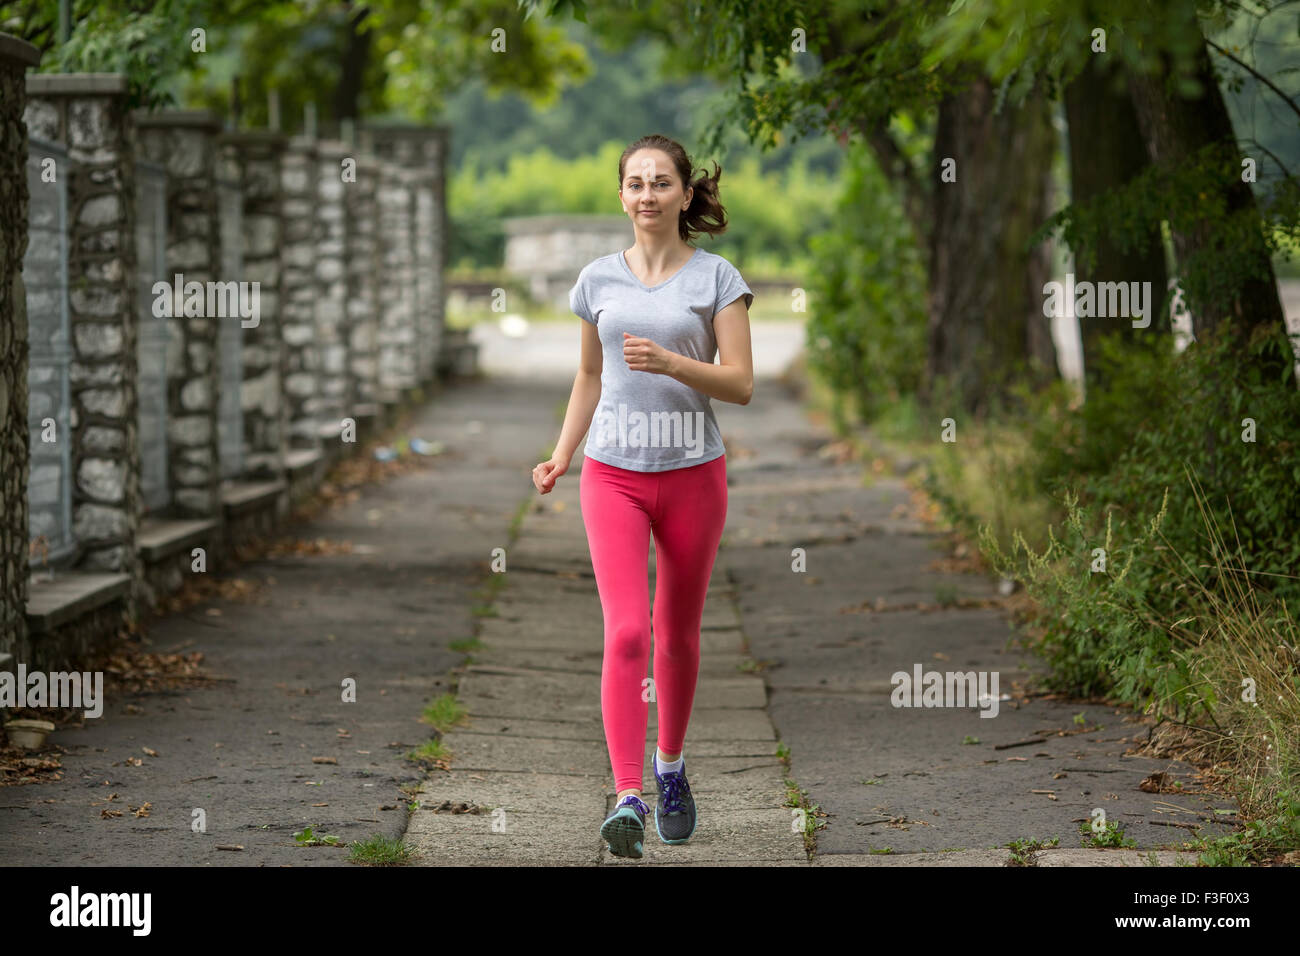 Young sports girl during a jog in the Park. Running, healthy lifestyle. Stock Photo